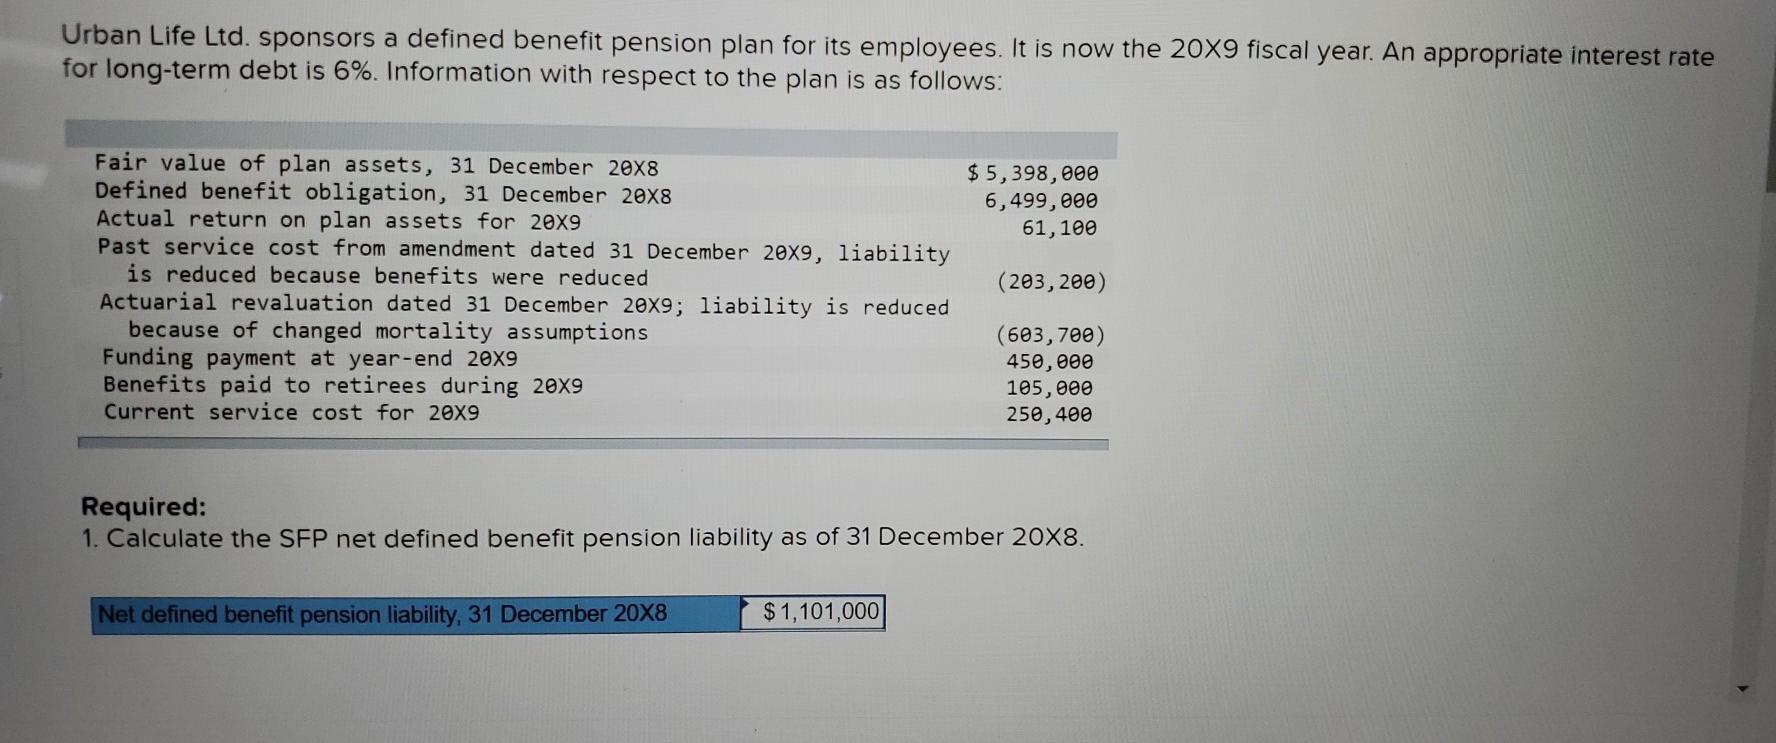 Urban Life Ltd. sponsors a defined benefit pension plan for its employees. It is now the 20X9 fiscal year. An appropriate int